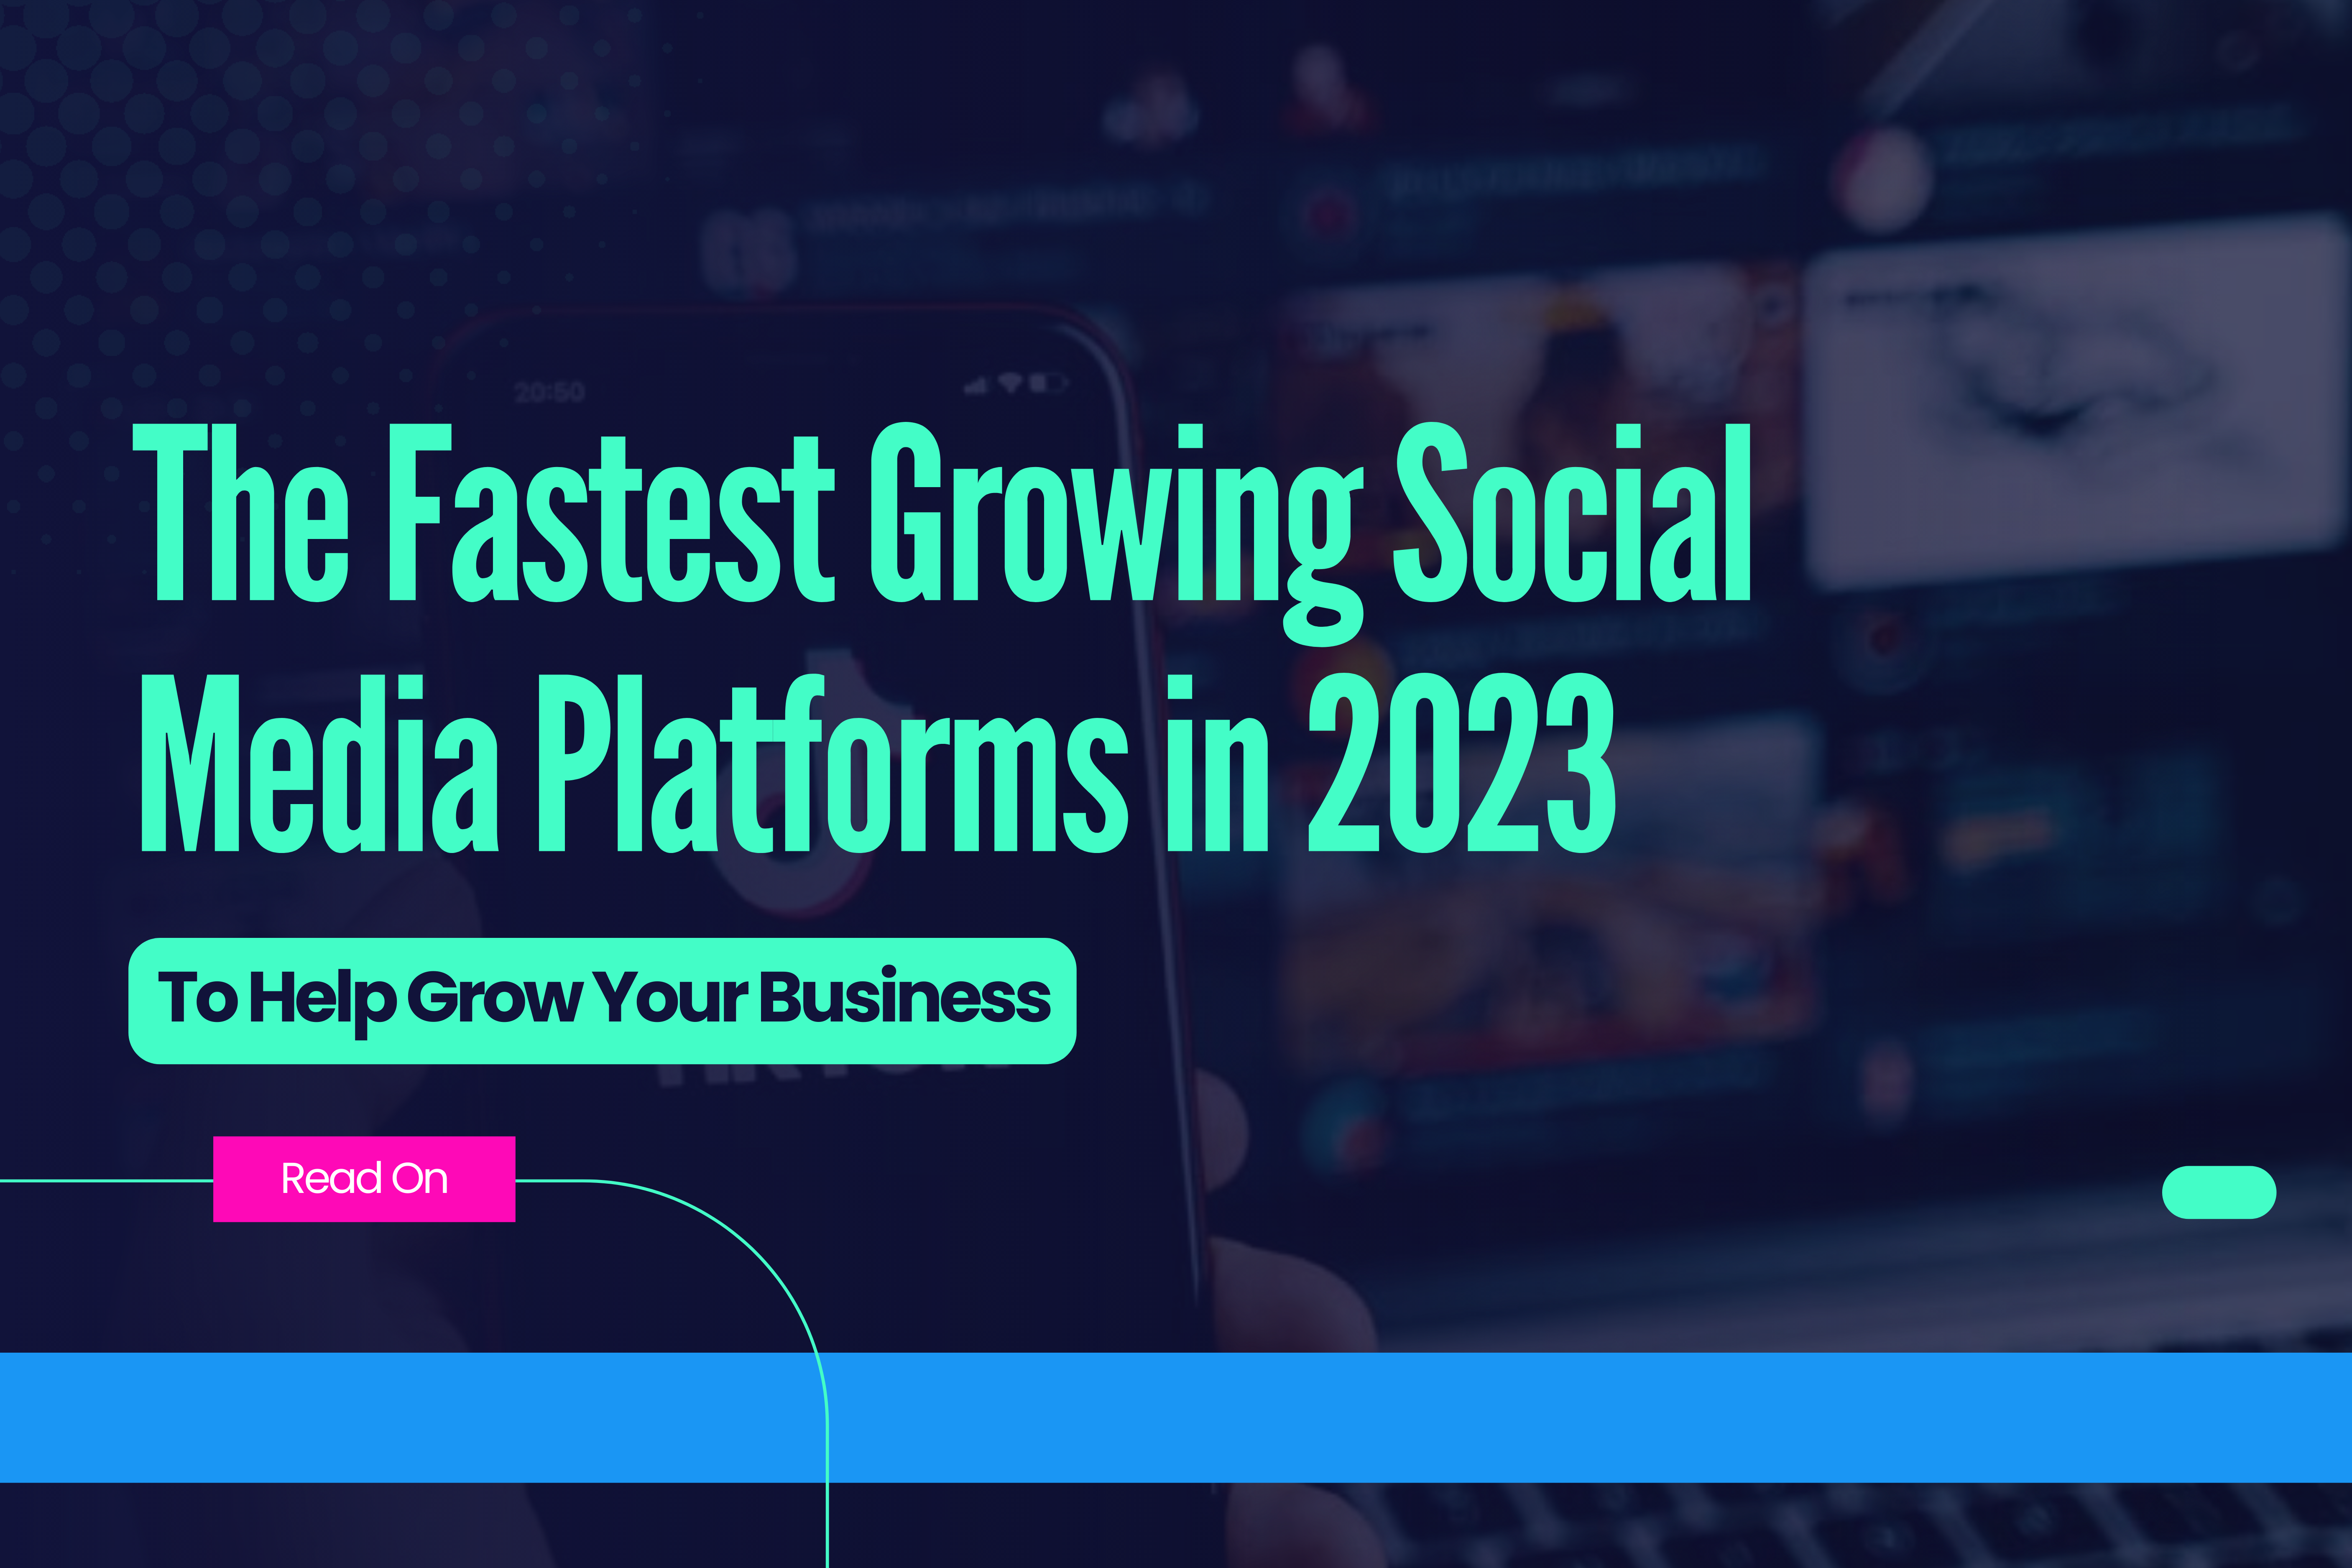 The Fastest Growing Social Media Platforms to Help You Grow Your Business in 2023